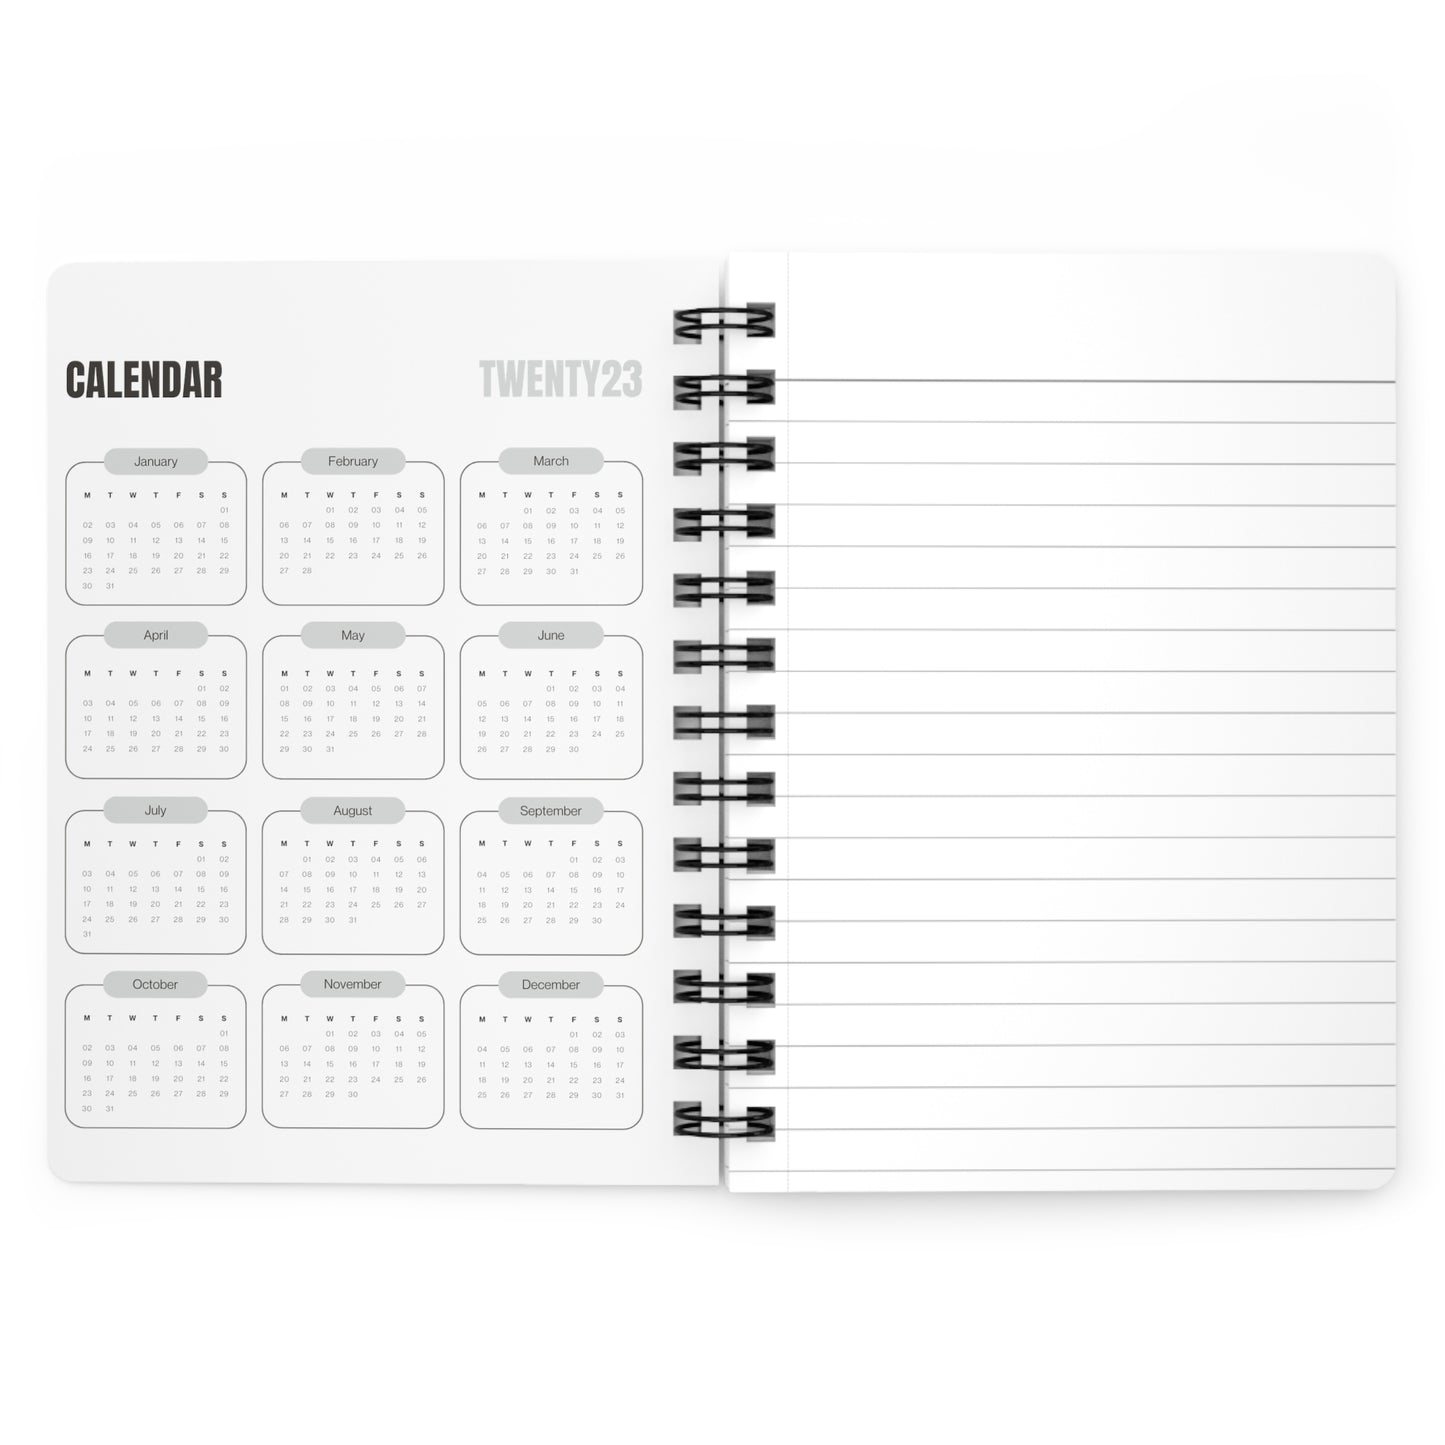 Pearls and Lace Spiral Bound Notebooks and Journals with 2023-2024 Year-at-a-Glance Calendar